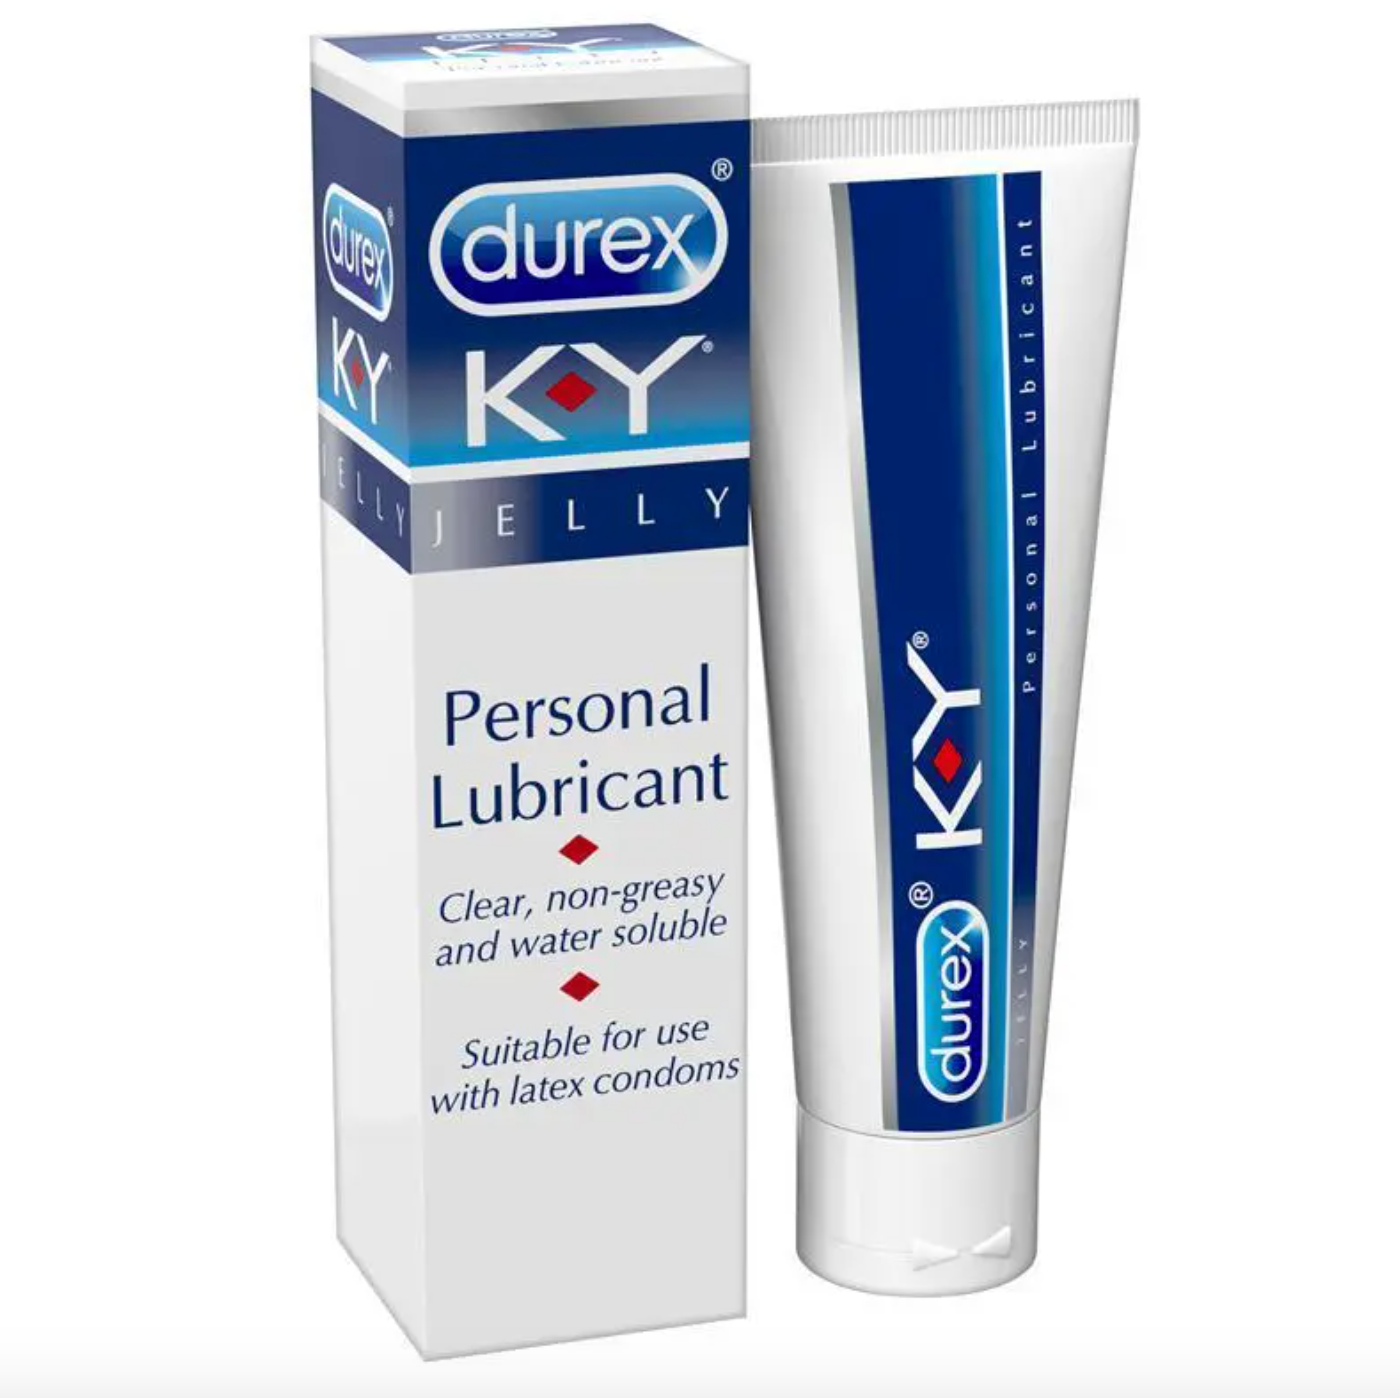 K-Y Jelly Personal Lubricant 100g